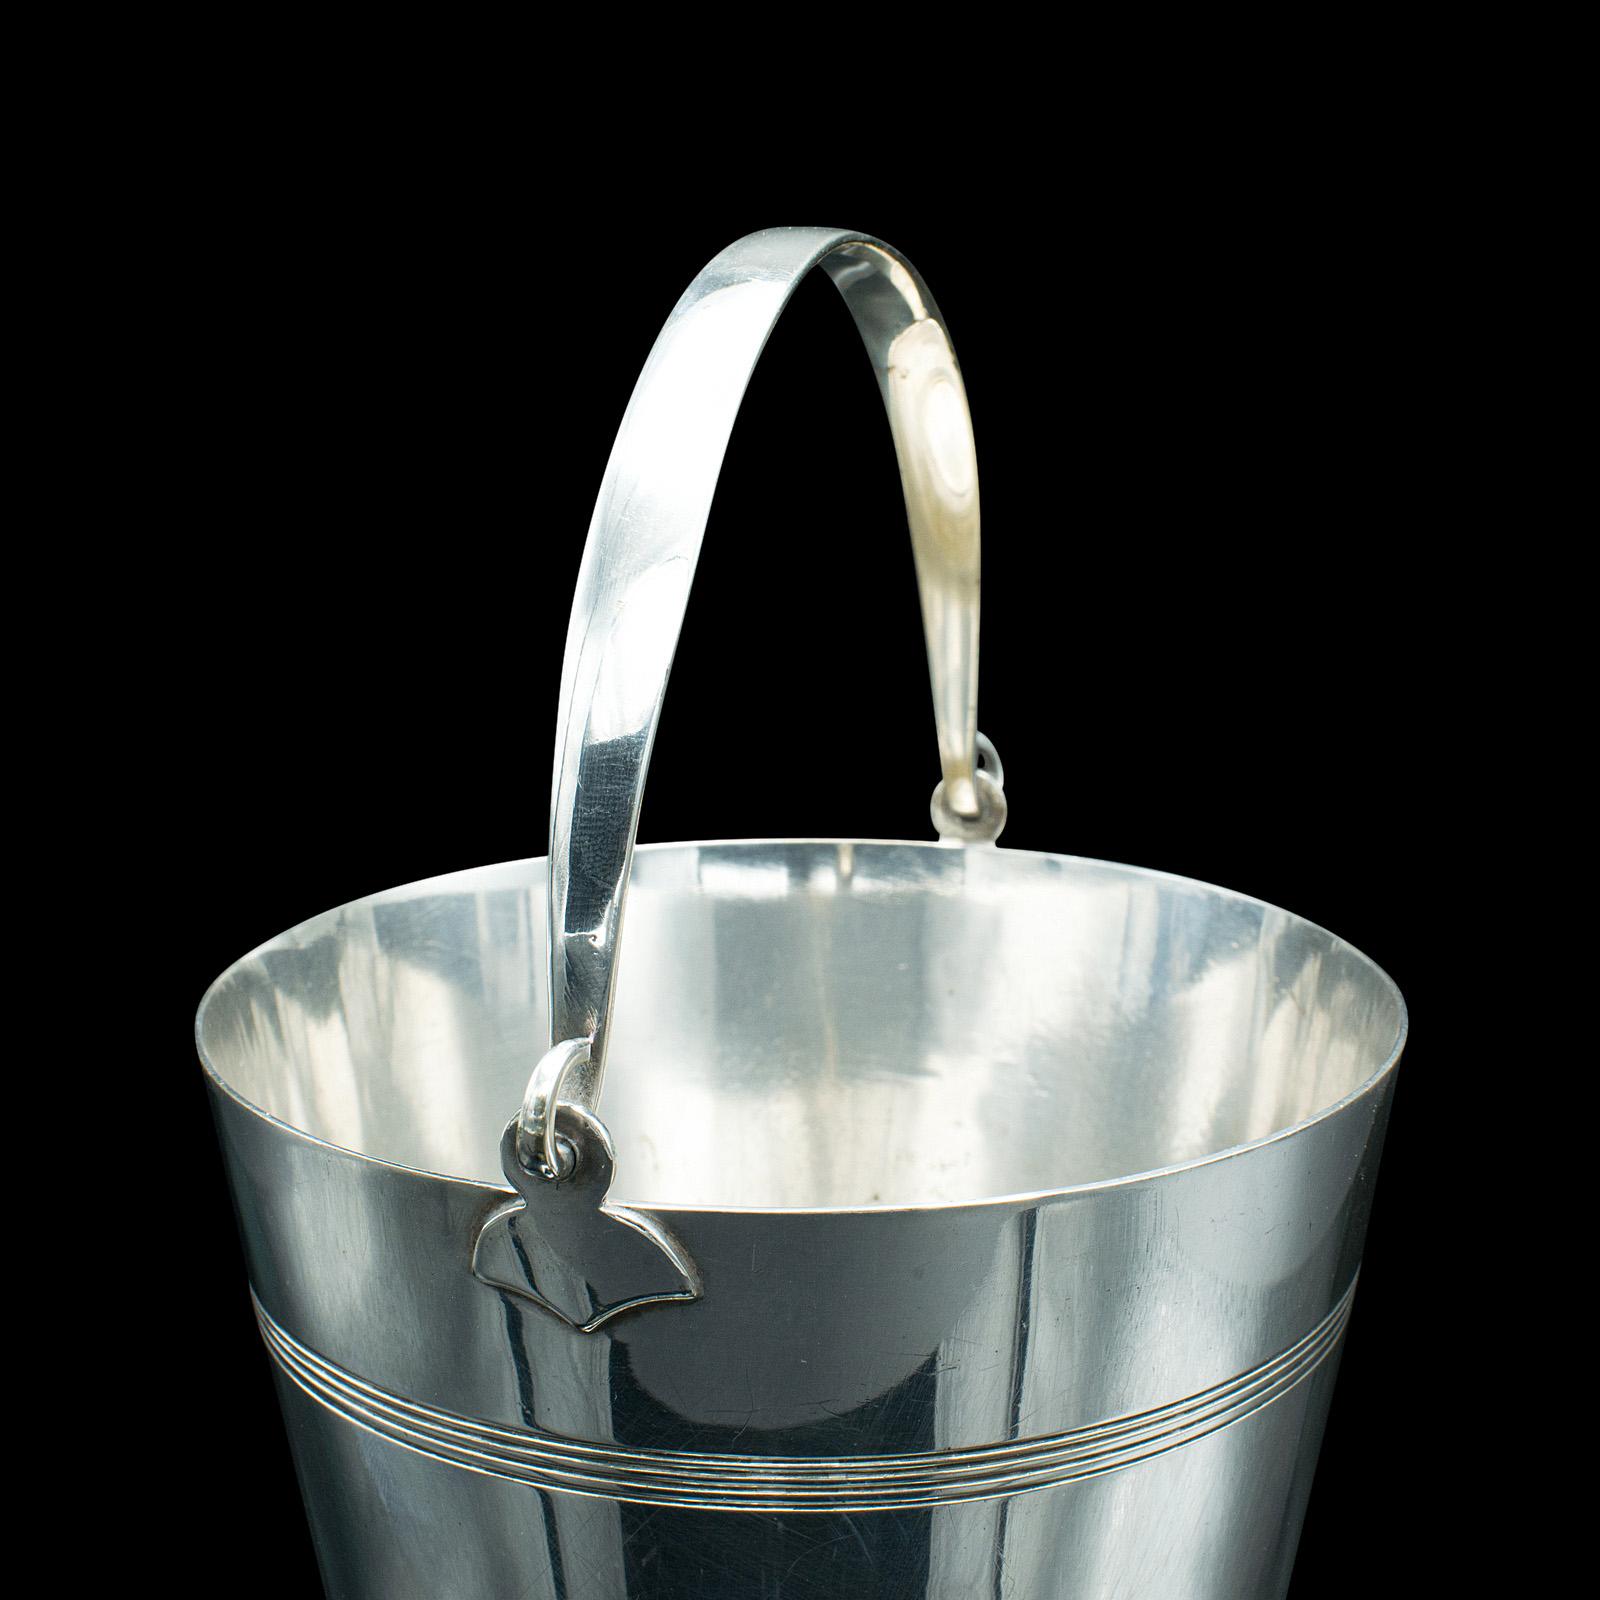 Antique Tabletop Ice Bucket, English, Silver Plate, Decorative Cooler, Edwardian For Sale 5